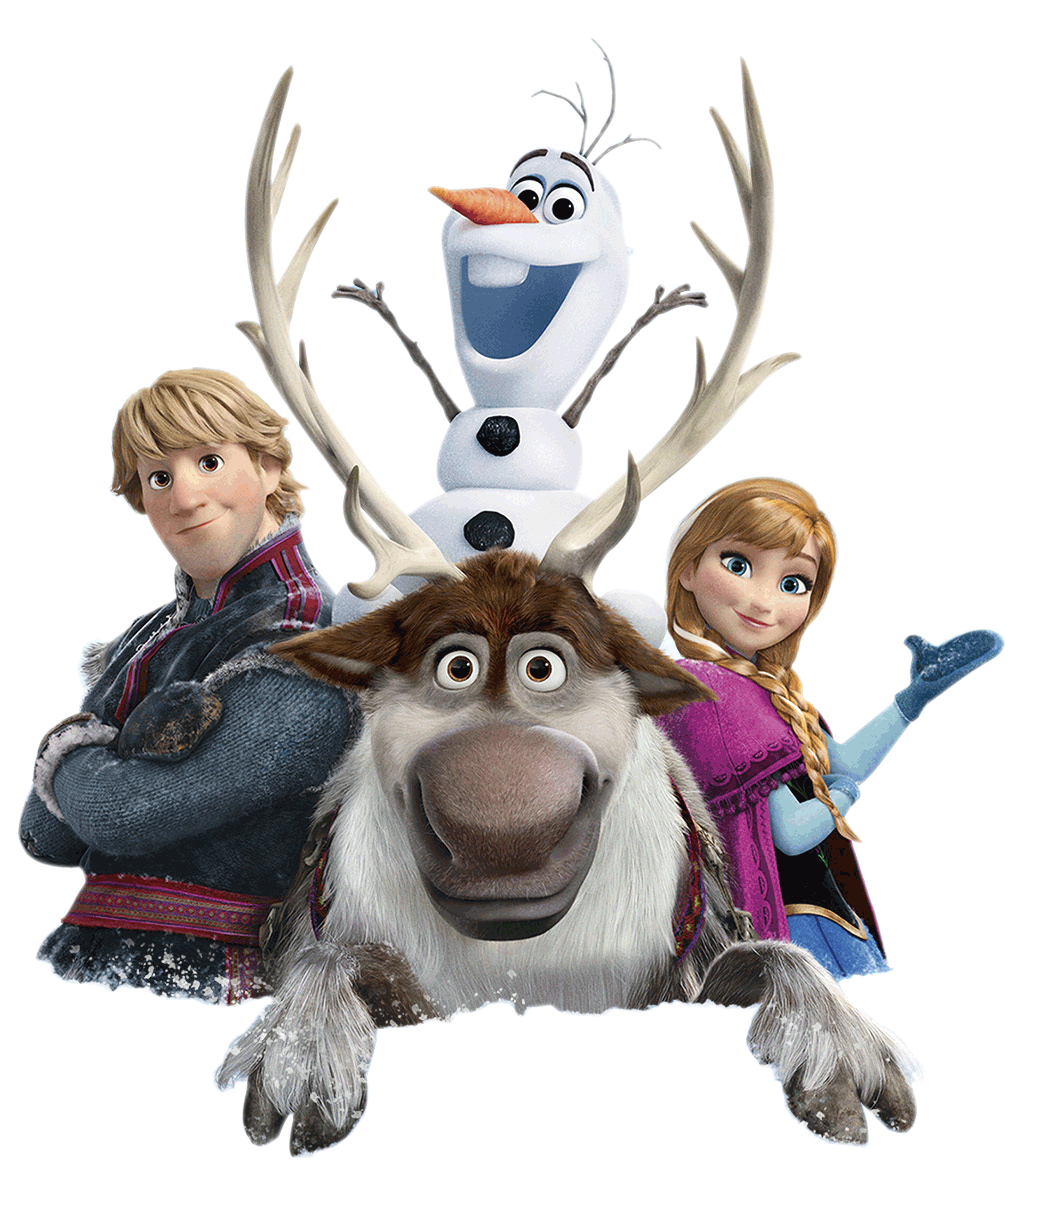 Frozen Characters Free Download Image PNG Image